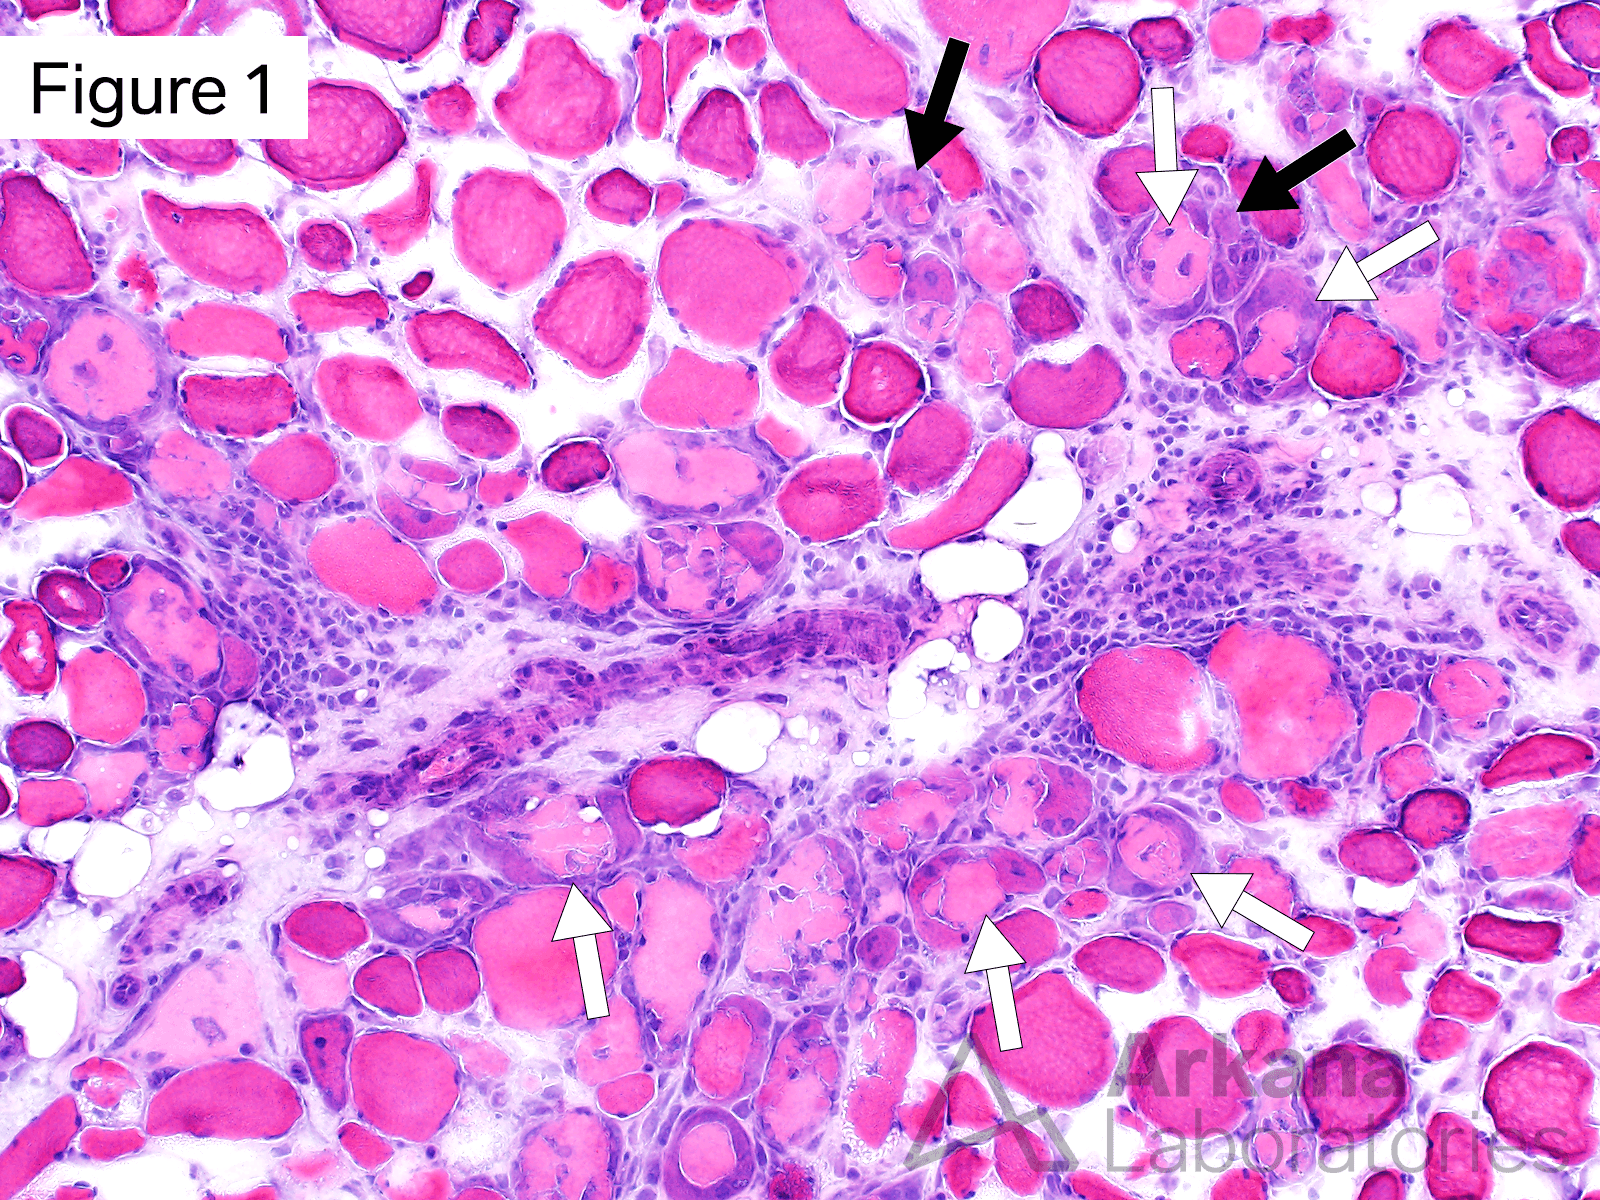 This medium magnification image shows basophilic regenerating (black arrows) and pale staining centrally necrotic muscle fibers (white arrows) in a perifascicular distribution. Note the presence of mild chronic lymphoid inflammation within the endomysium.